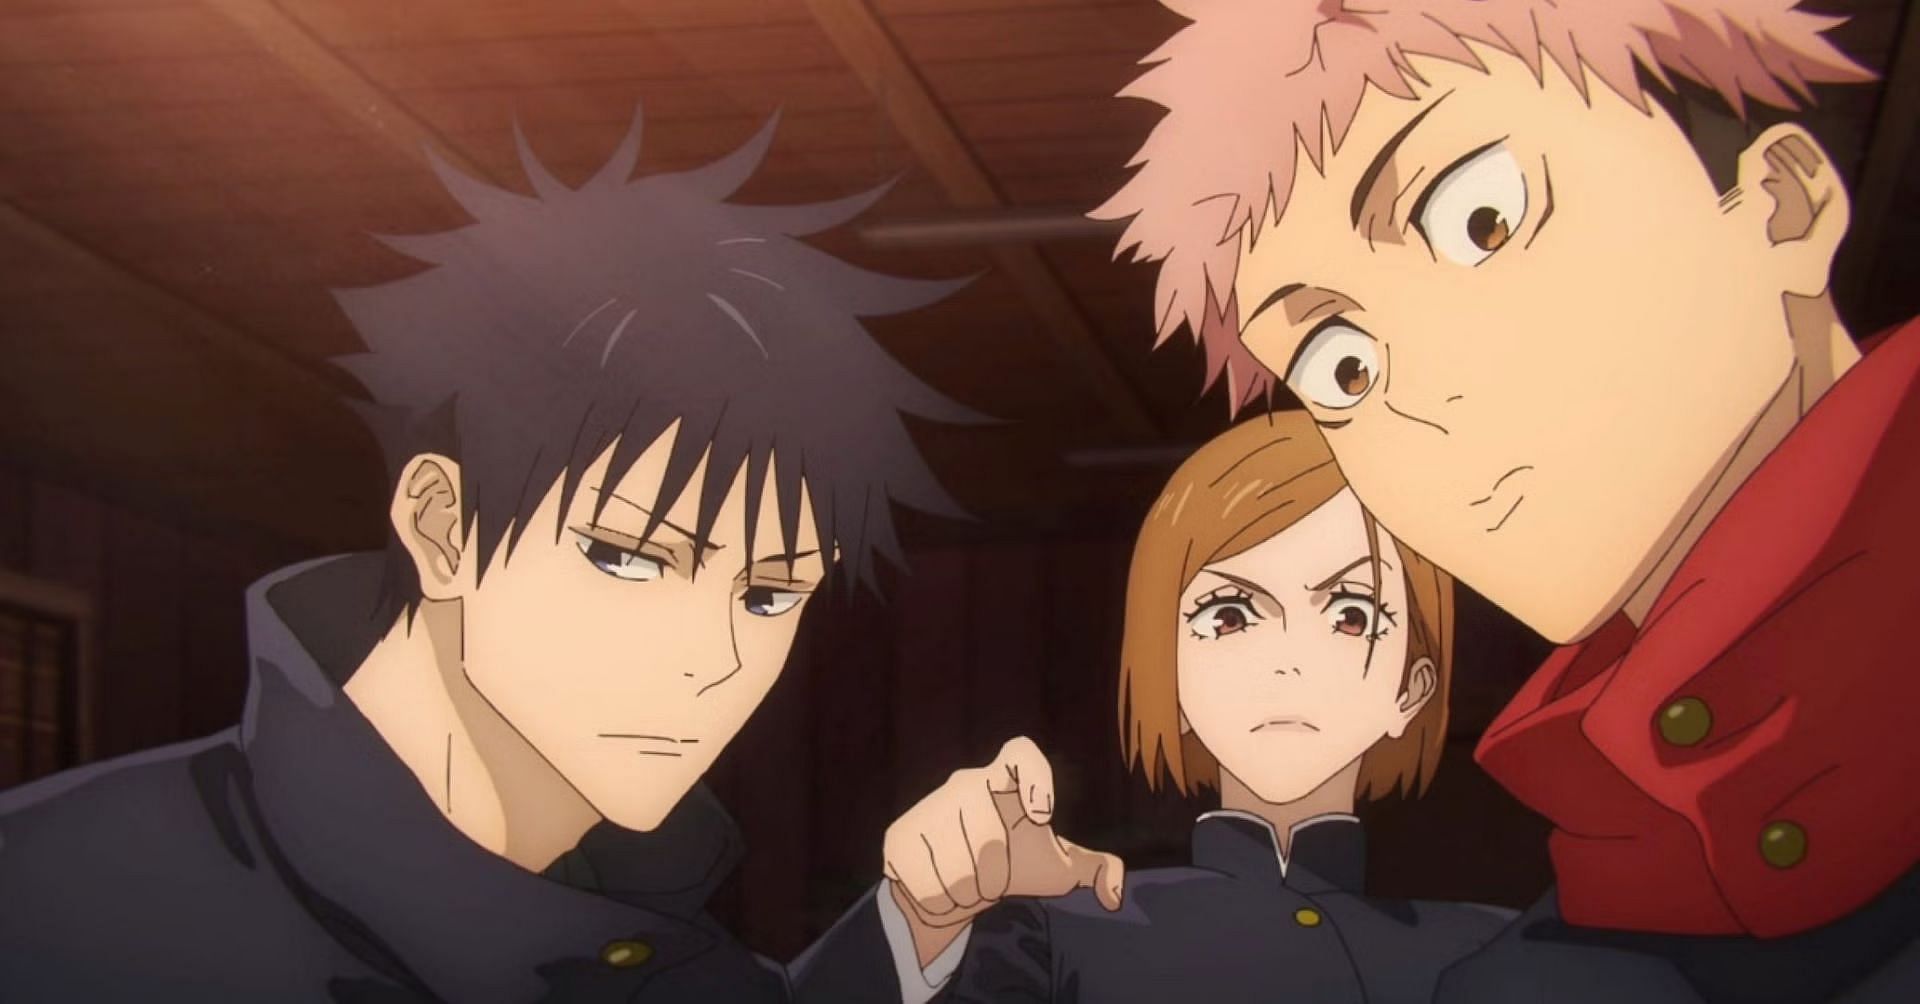 Jujutsu Kaisen is on break after chapter 261, and fans can